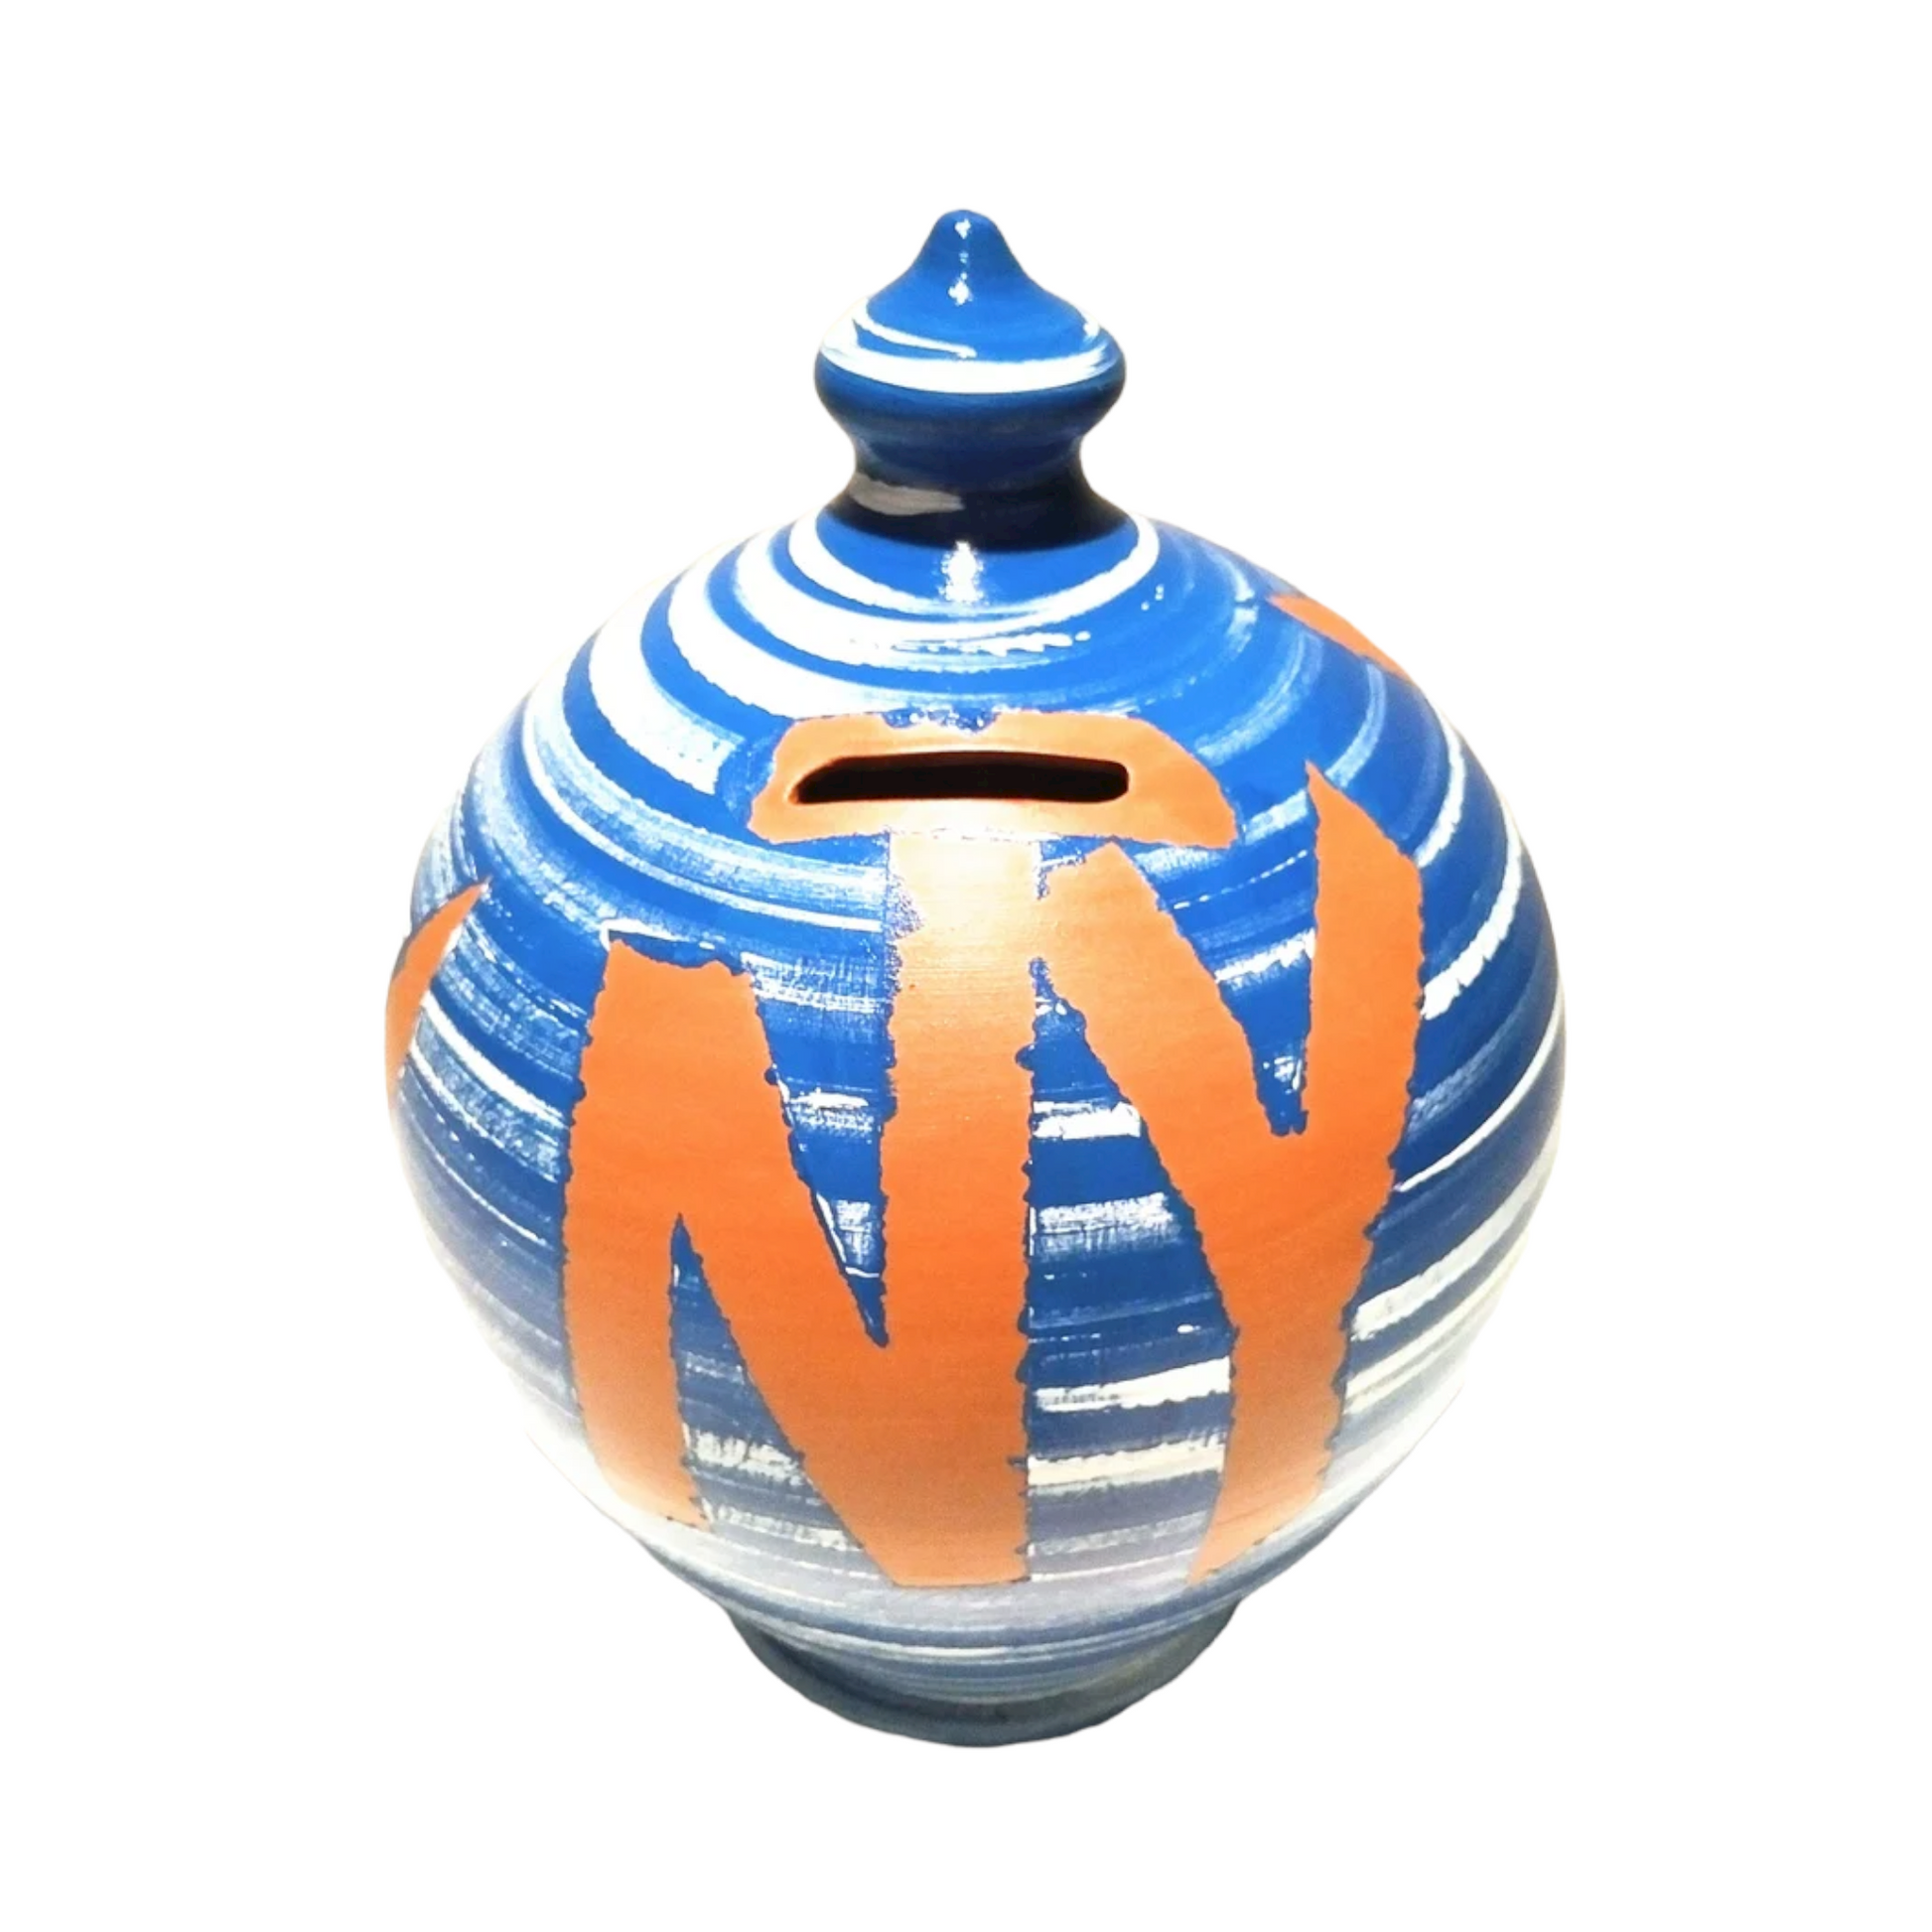 Travel Fund, Piggy bank, Adult Penny Bank, Money Bank Adult.  Size: 30 cm = 11,811 Inches. Made to order.  Colors: White, Cobalt Blue and terracotta.  With hole and stopper plug, or without hole.